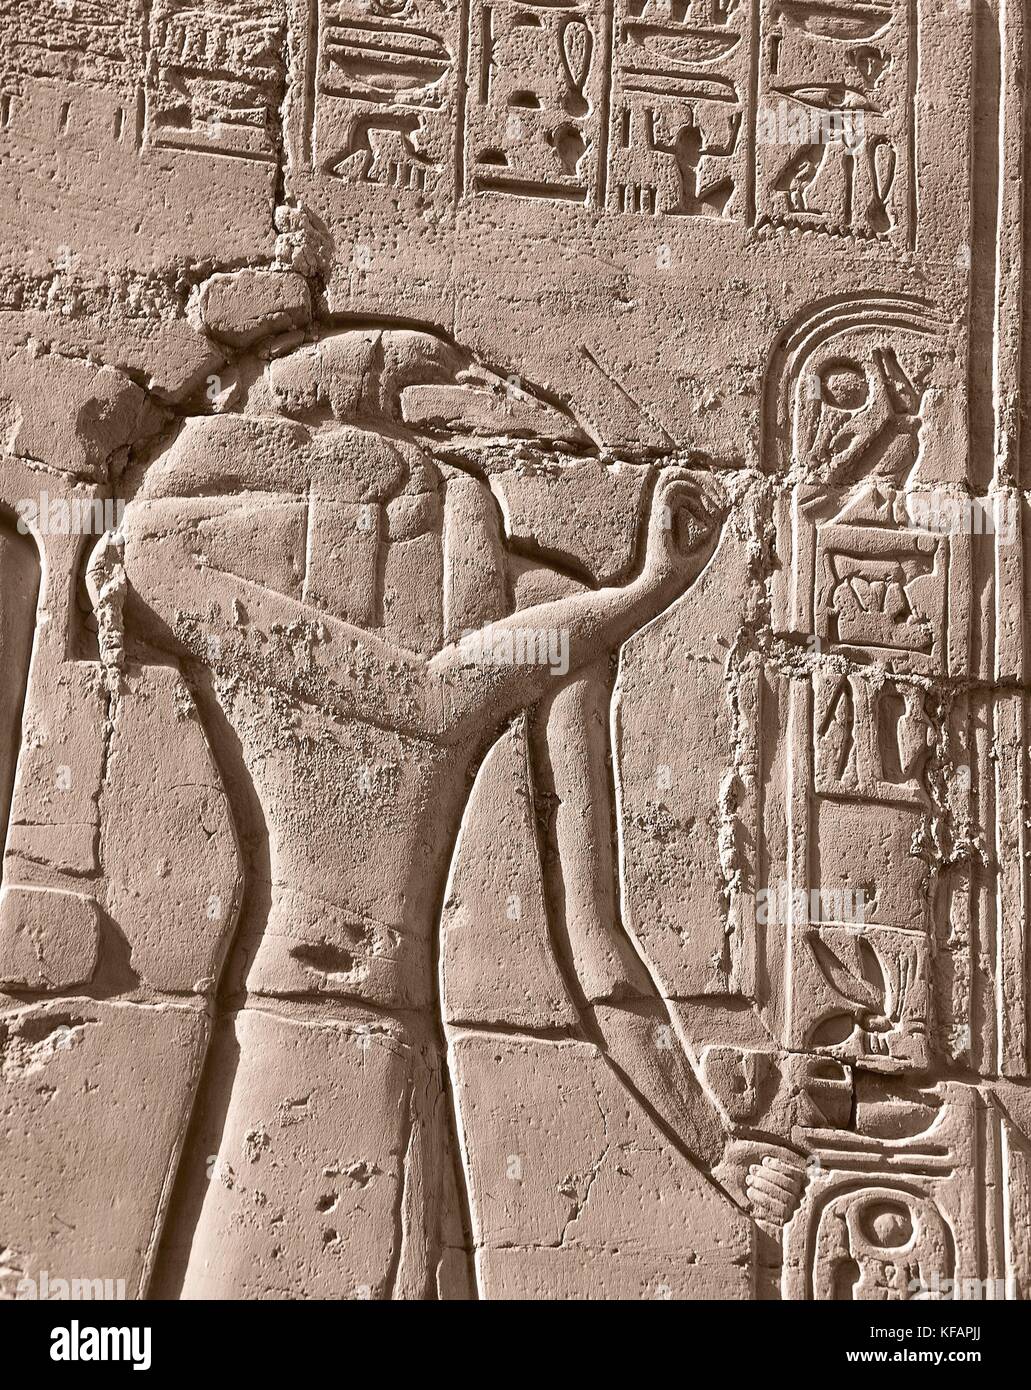 The God Thoth writing, detail from scenes of offerings to the gods, relief, interior walls of the Great Hypostyle Hall, Temple of Amun, Karnak temple complex (Unesco World Heritage List, 1979). Egyptian civilisation, New Kingdom, Dynasty XIX. Stock Photo